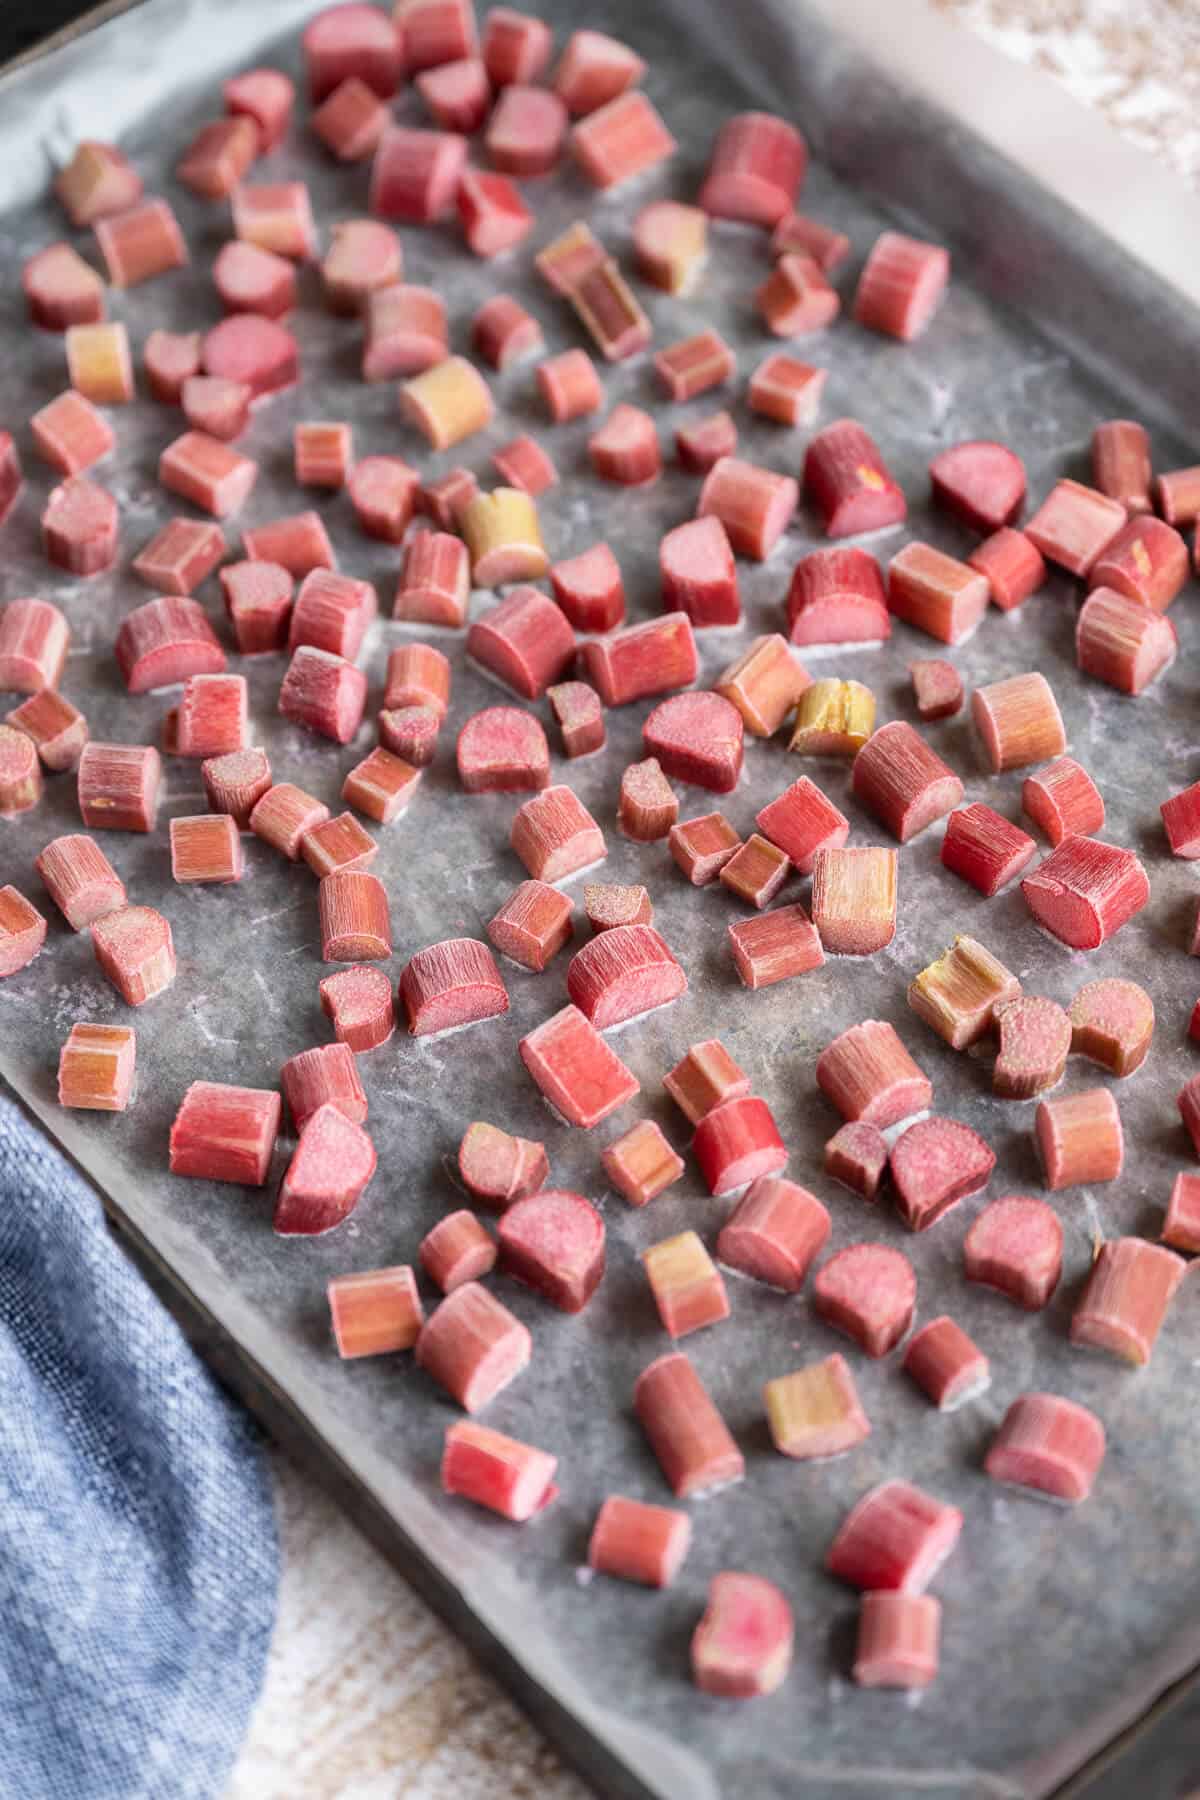 Pieces of frozen rhubarb on a wax paper lined rimmed baking sheet.